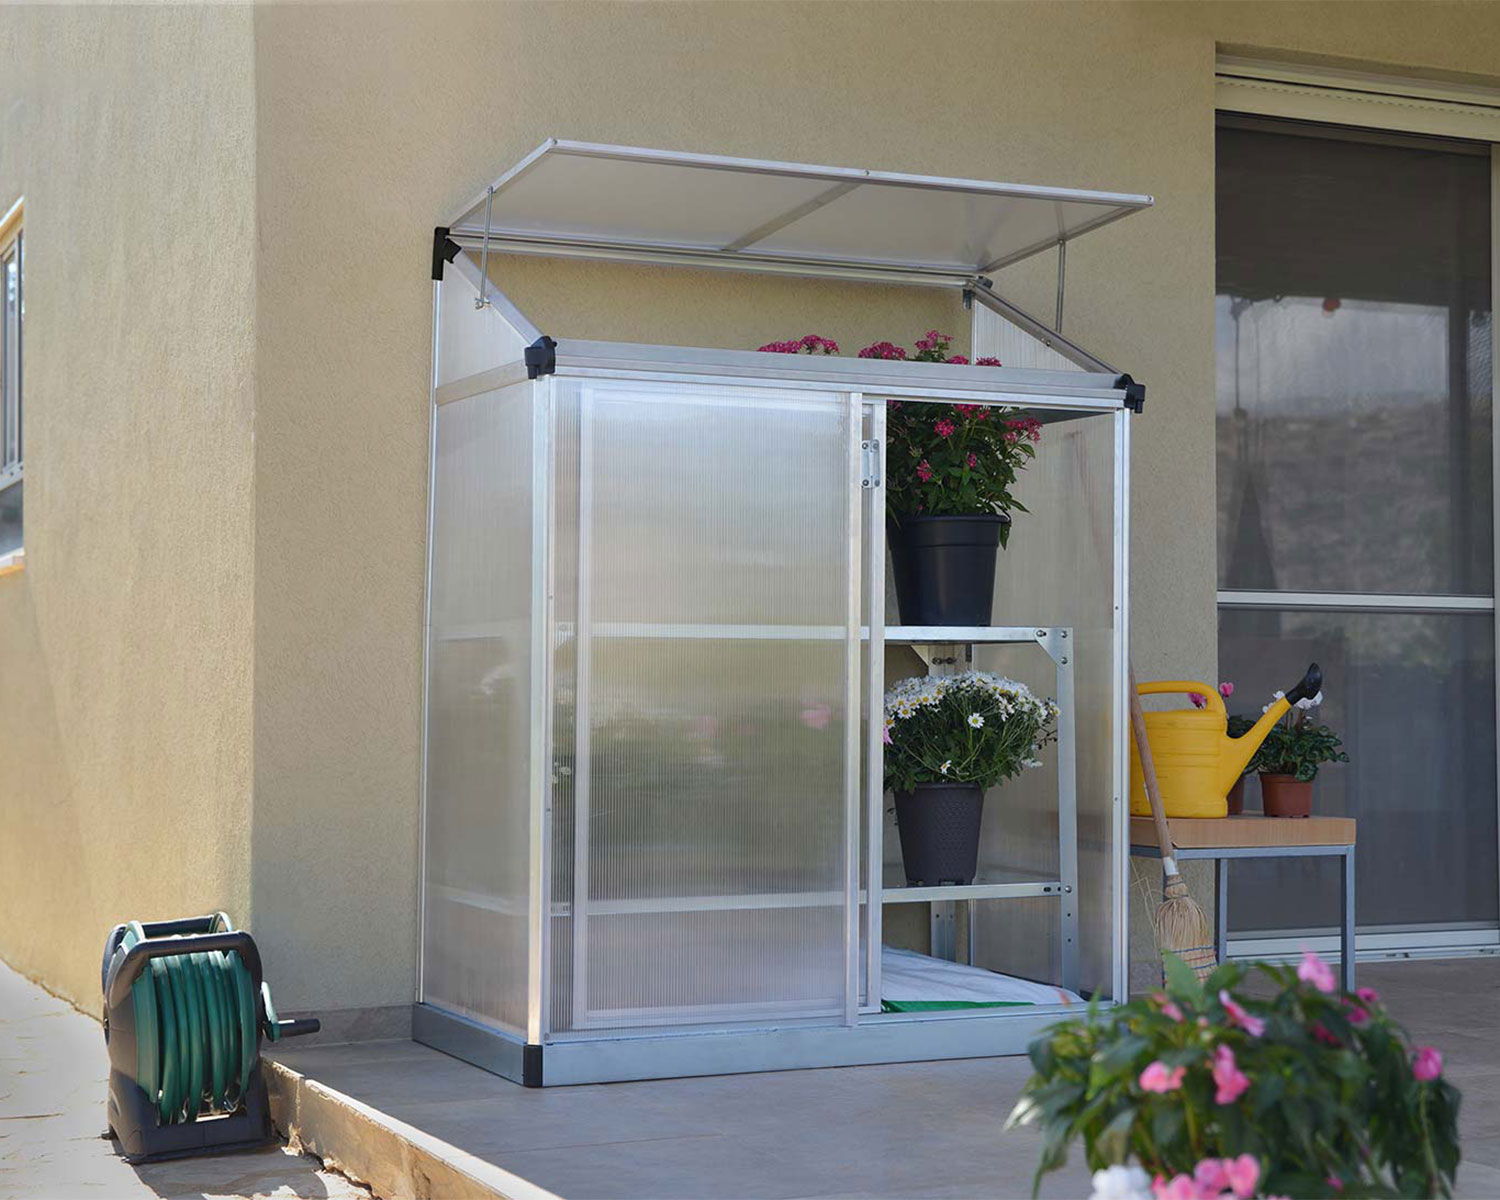 Lean To Greenhouse 4' x 2' Kit - Silver Structure & Twinwall Glazing